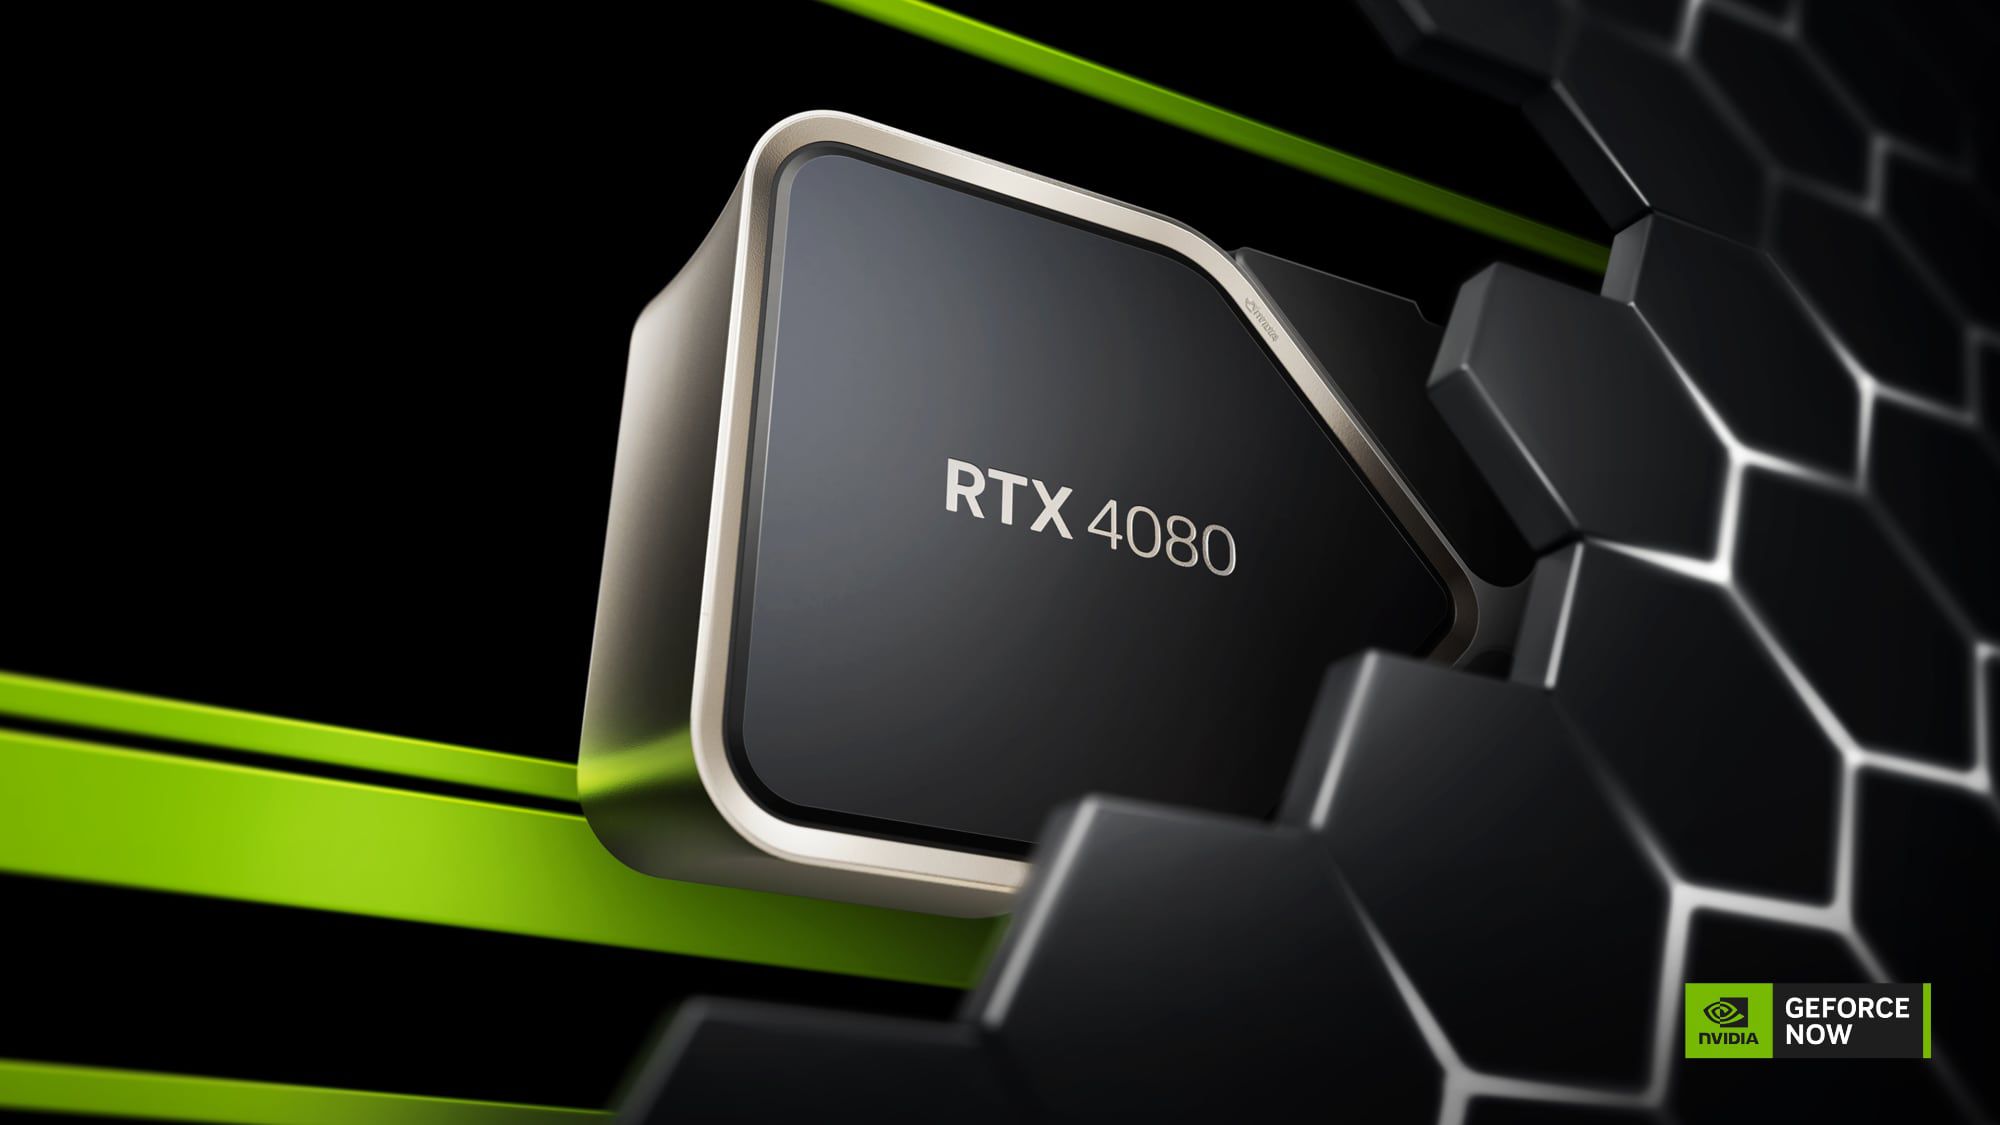 Nvidia Launches GeForce NOW 'Ultimate' Tier With RTX 4080 GPU for Cloud Gaming at 240 Frames Per Second - macrumors.com